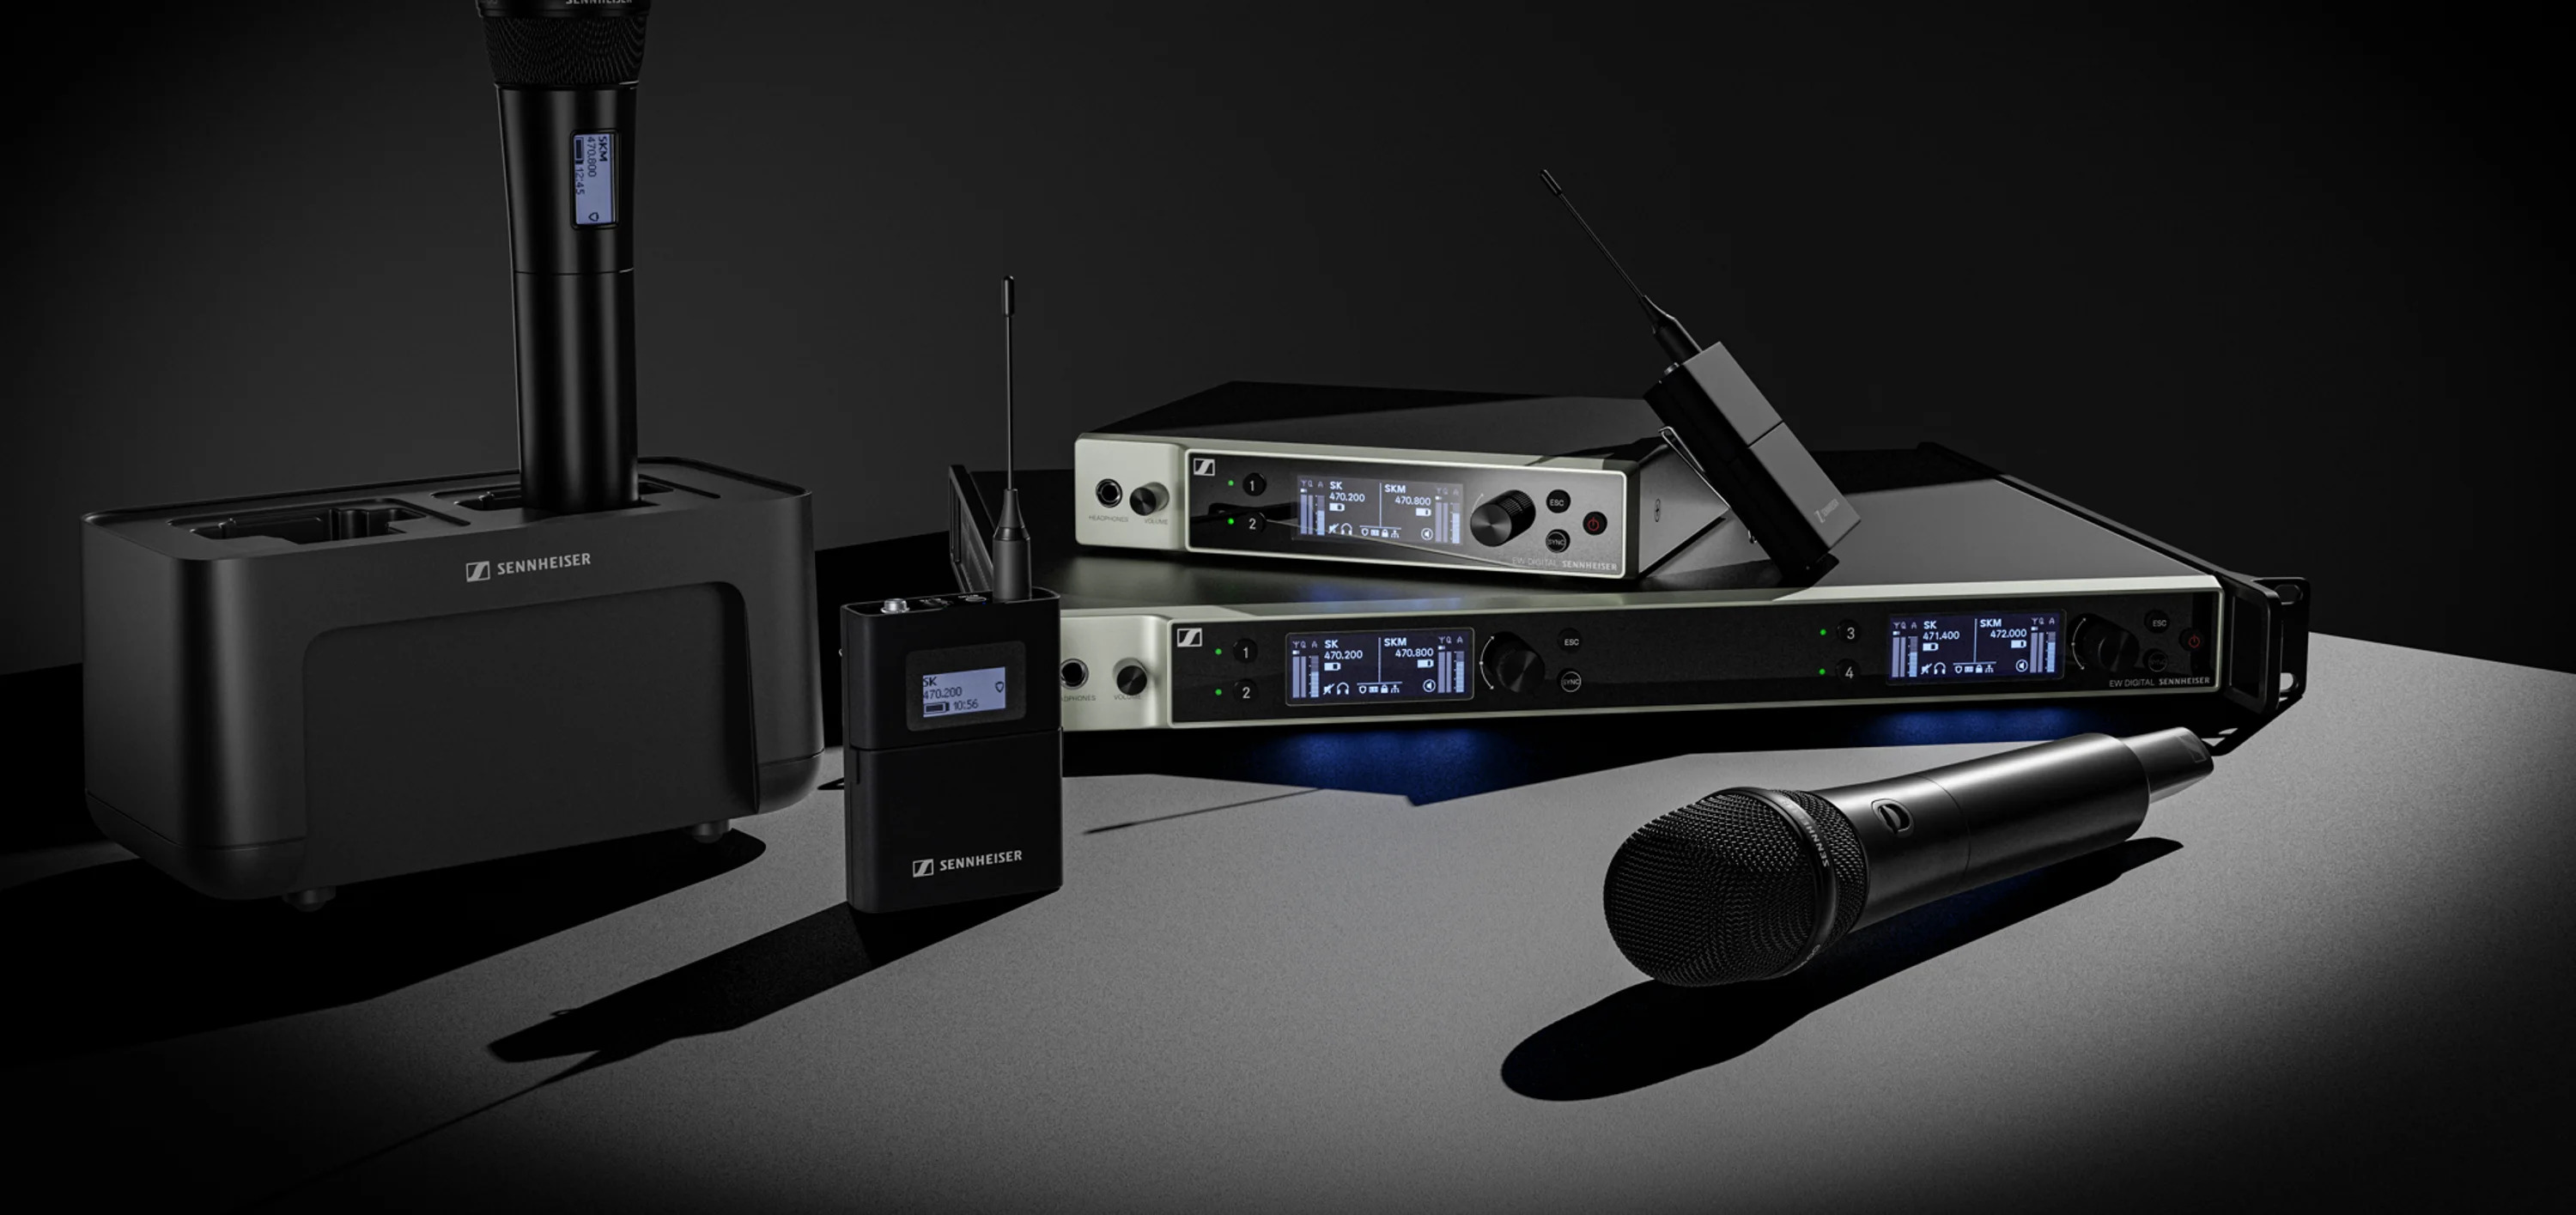 The EW-DX microphone system